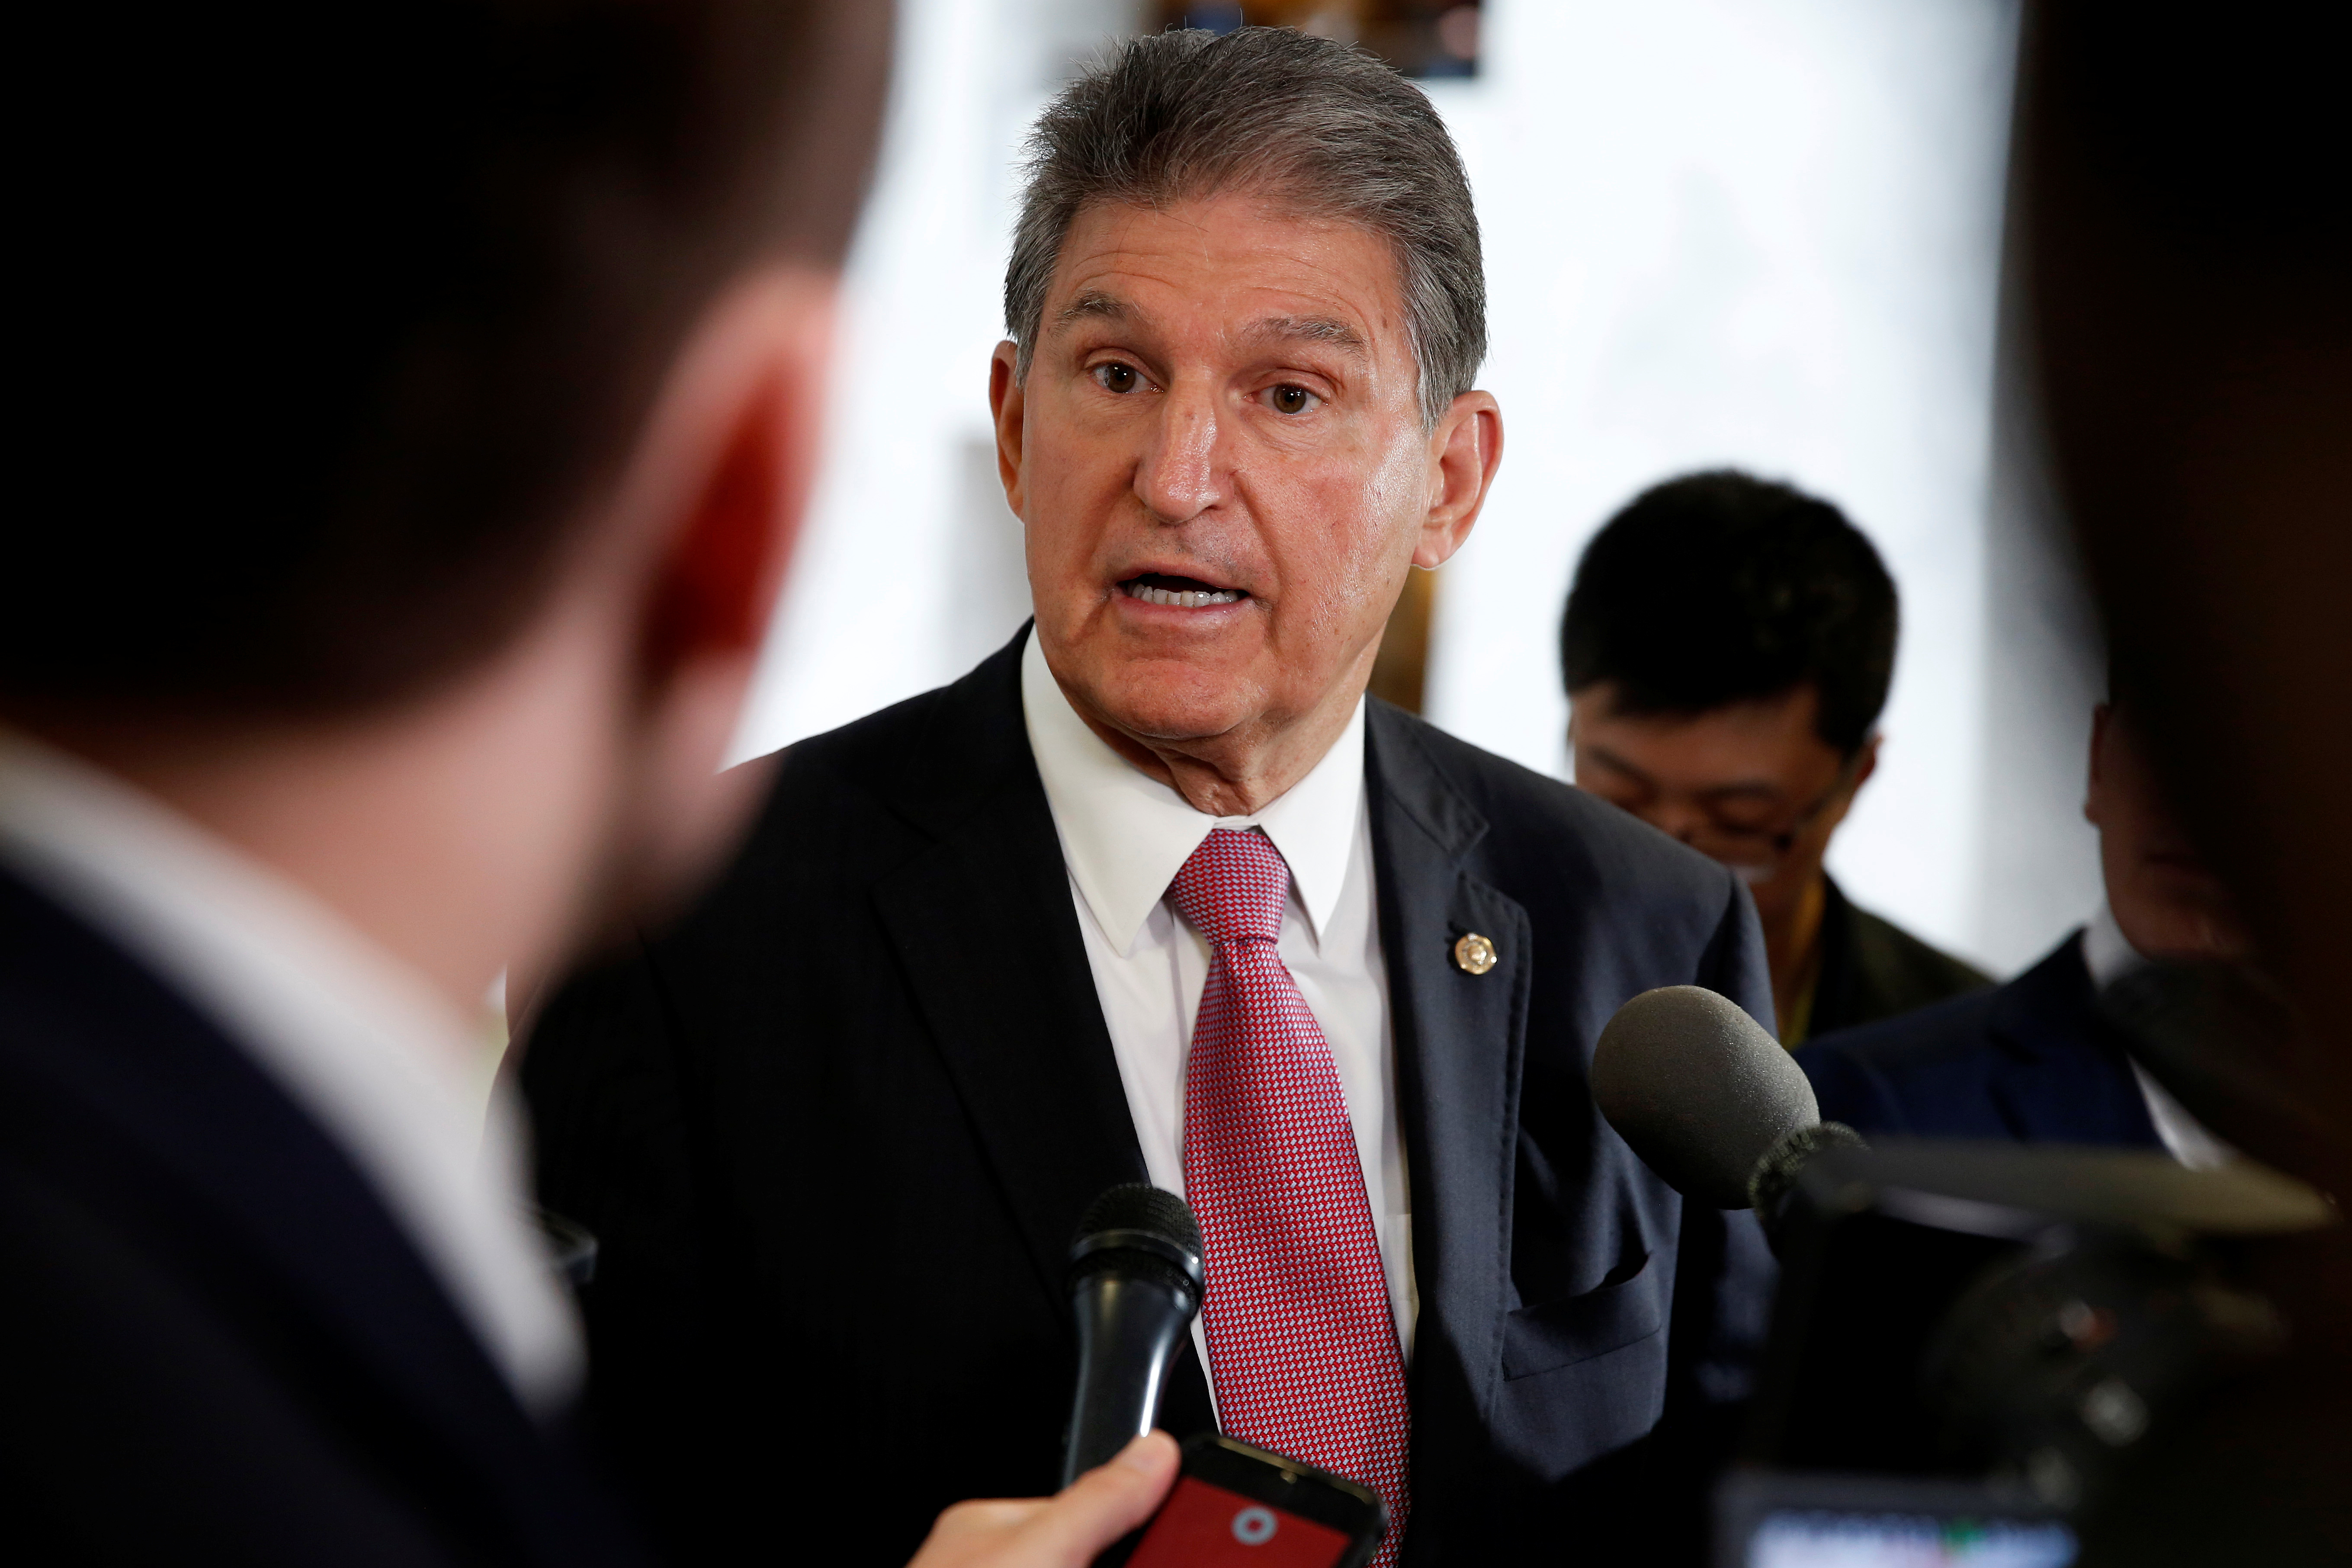 Senator Joe Manchin (D-WV) speaks to the media as he arrives for a Senate Intelligence Committee hearing evaluating Russian interference in U.S. elections